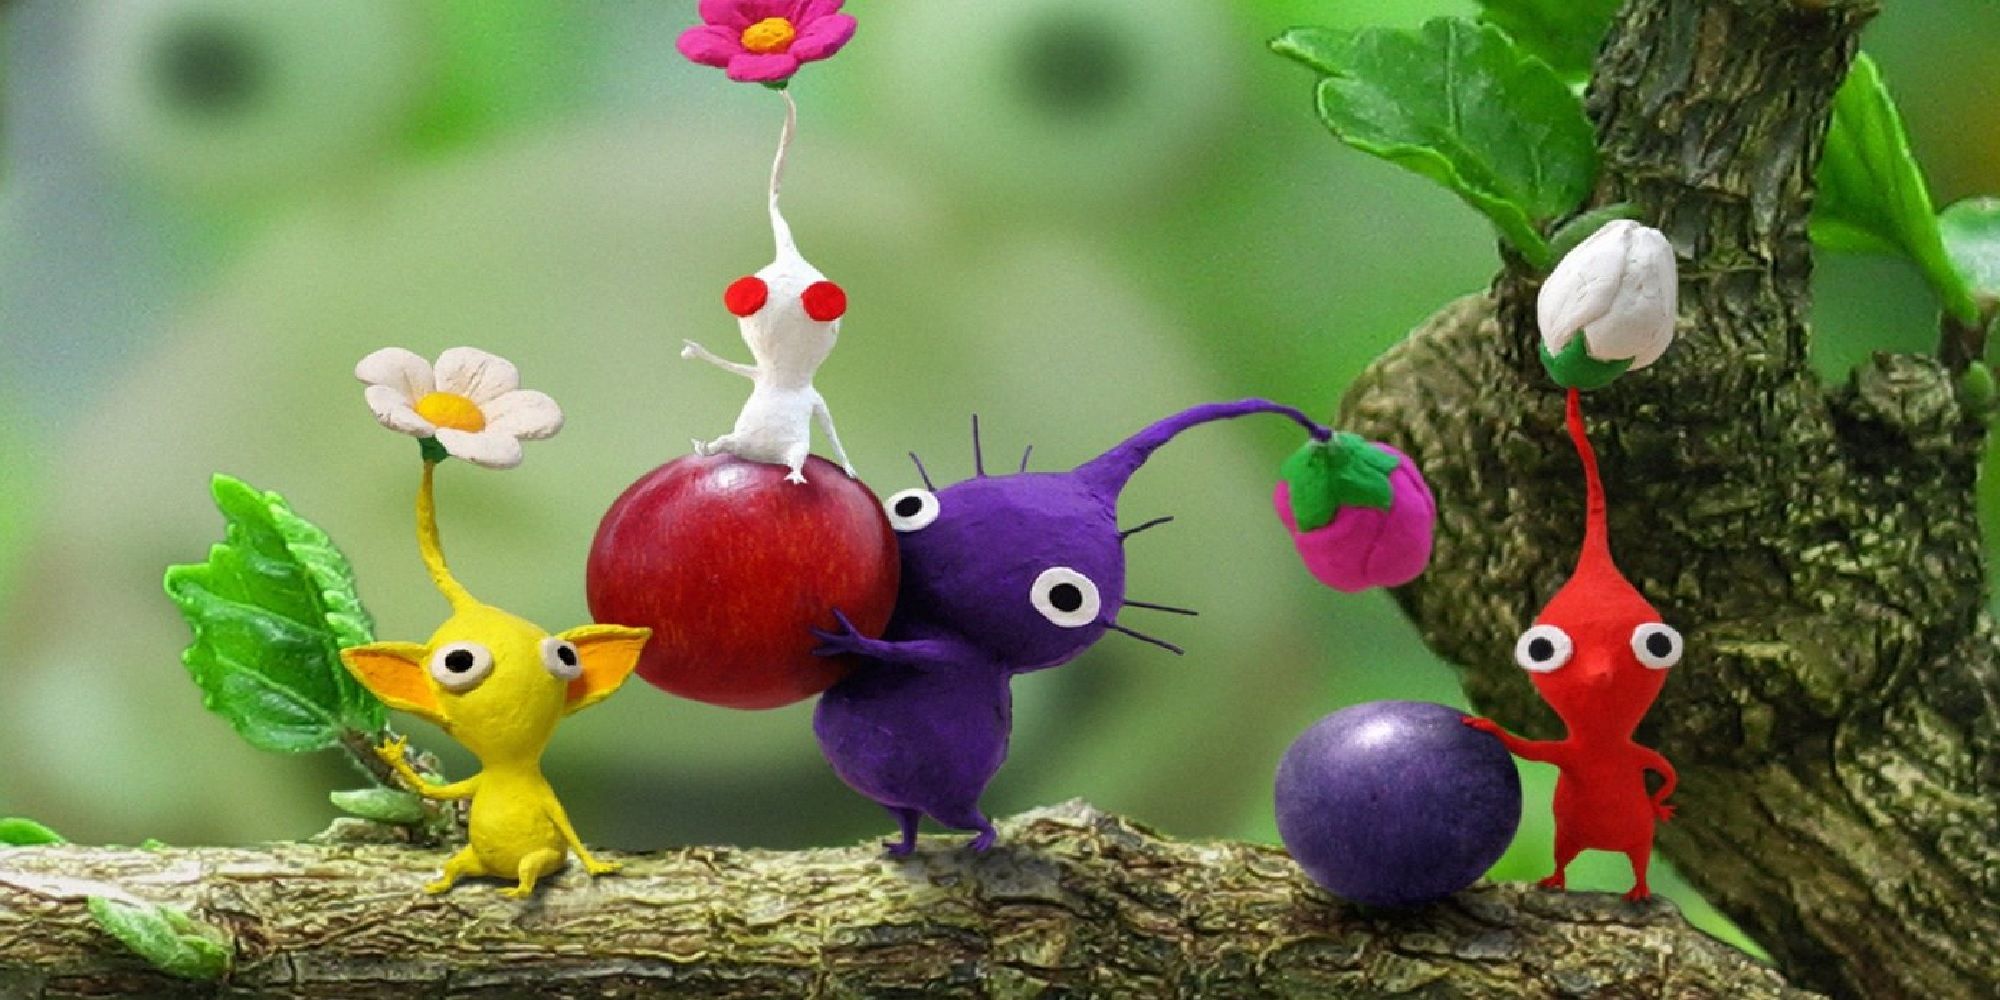 An image of the Pikmin helping each other by carrying berries